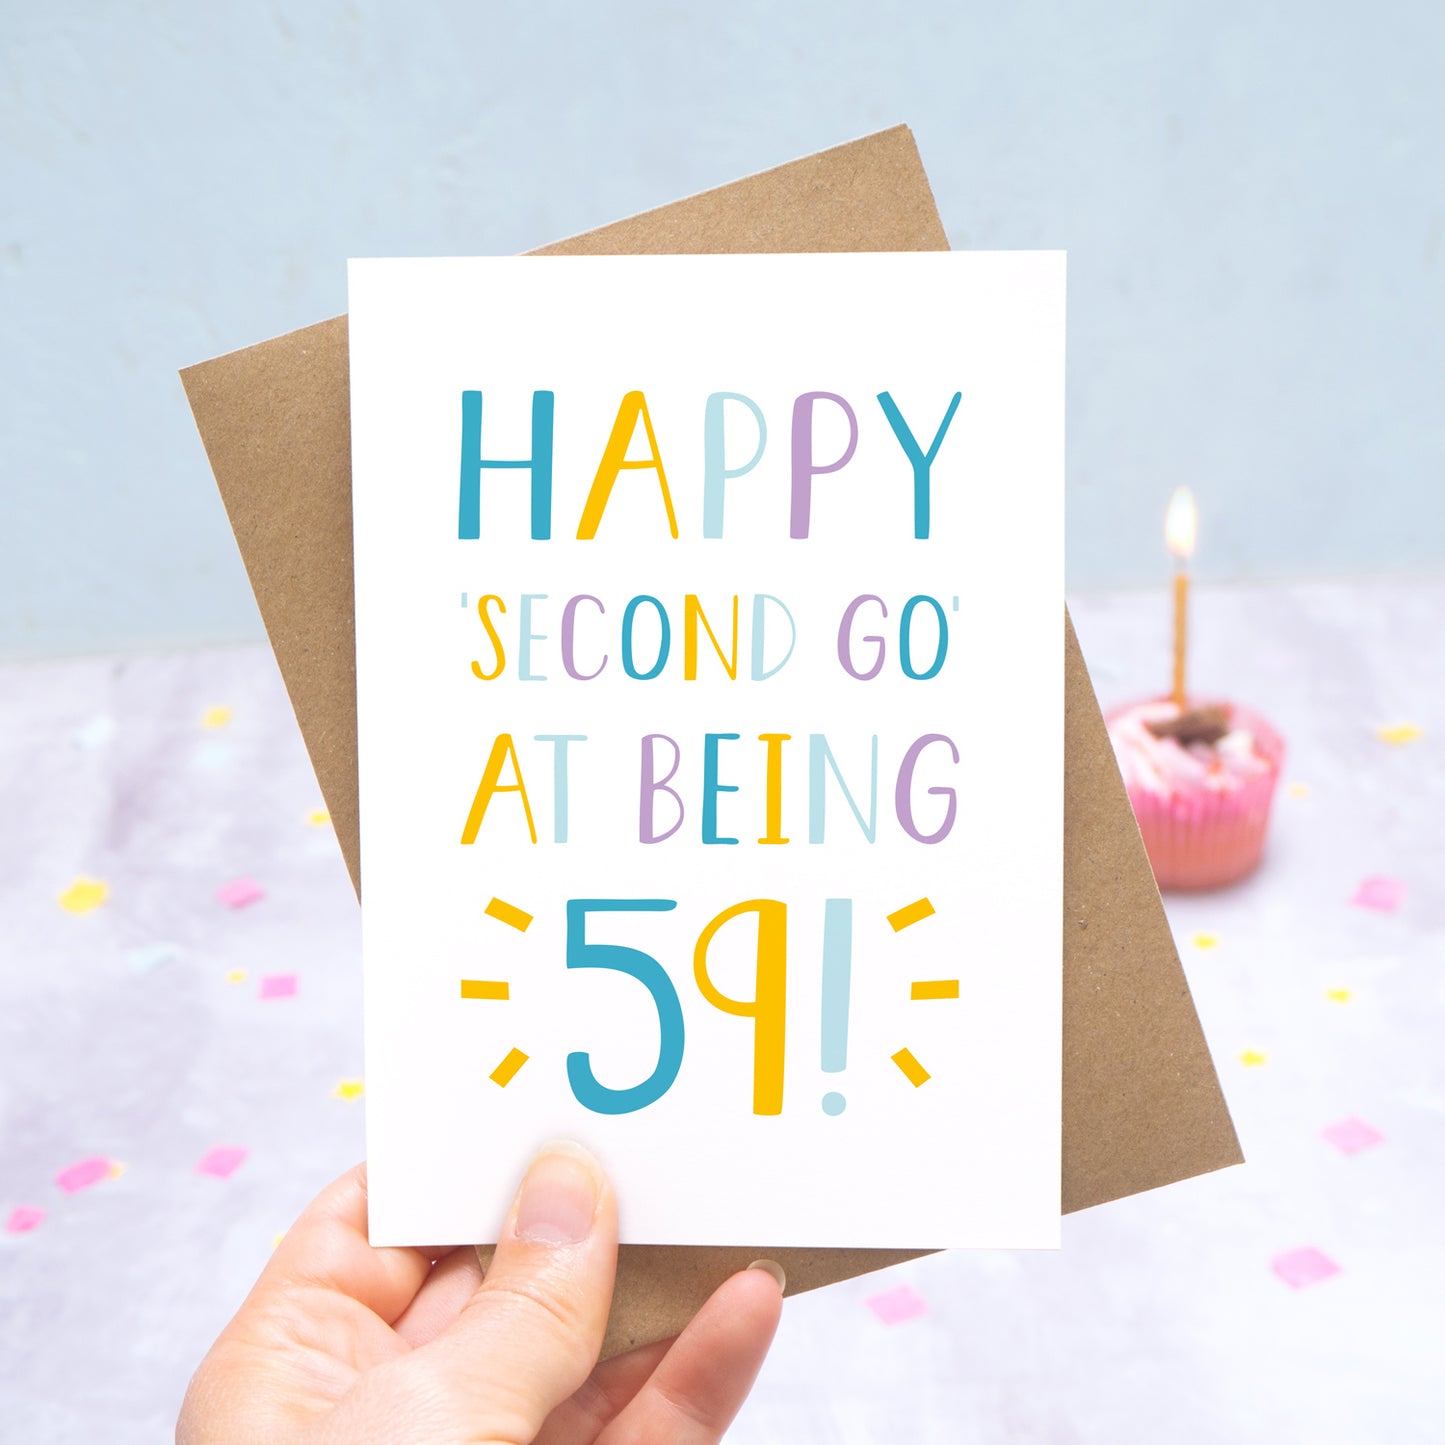 Happy second go at being 59 - milestone age card in blue, yellow and purple photographed on a grey and blue background with a cupcake and burning candle.